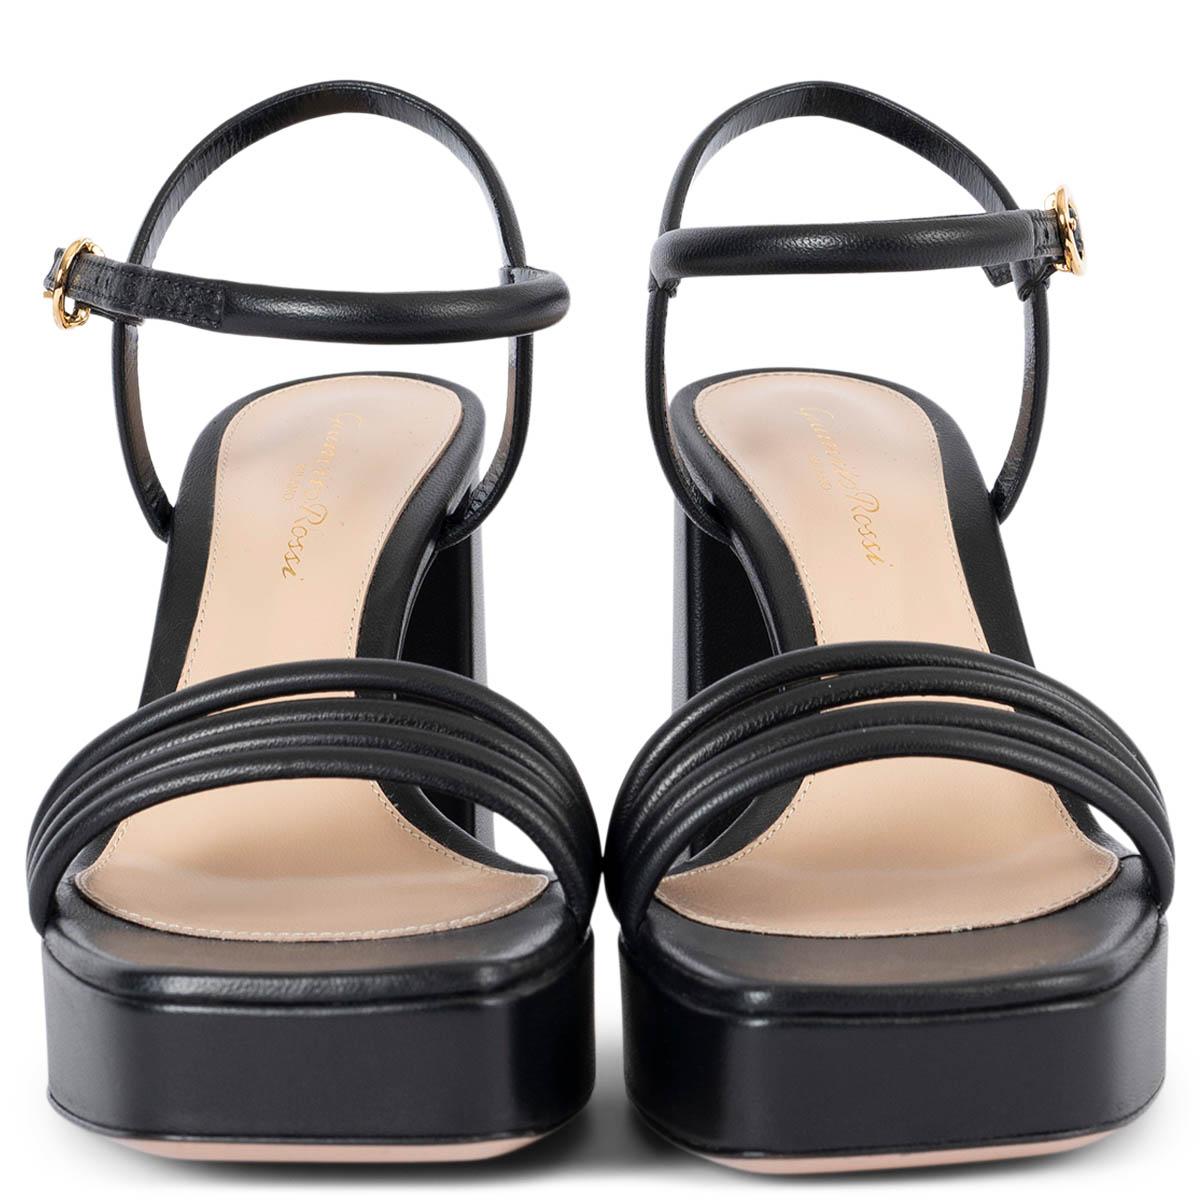 100% authentic Gianvito Rossi Lena 95 platform sandals in black calfskin. They feature piped straps, round metallic buckled ankle straps, and a block heel. Brand new. Come with dust bags. 

Measurements
Imprinted Size	36
Shoe Size	36
Inside